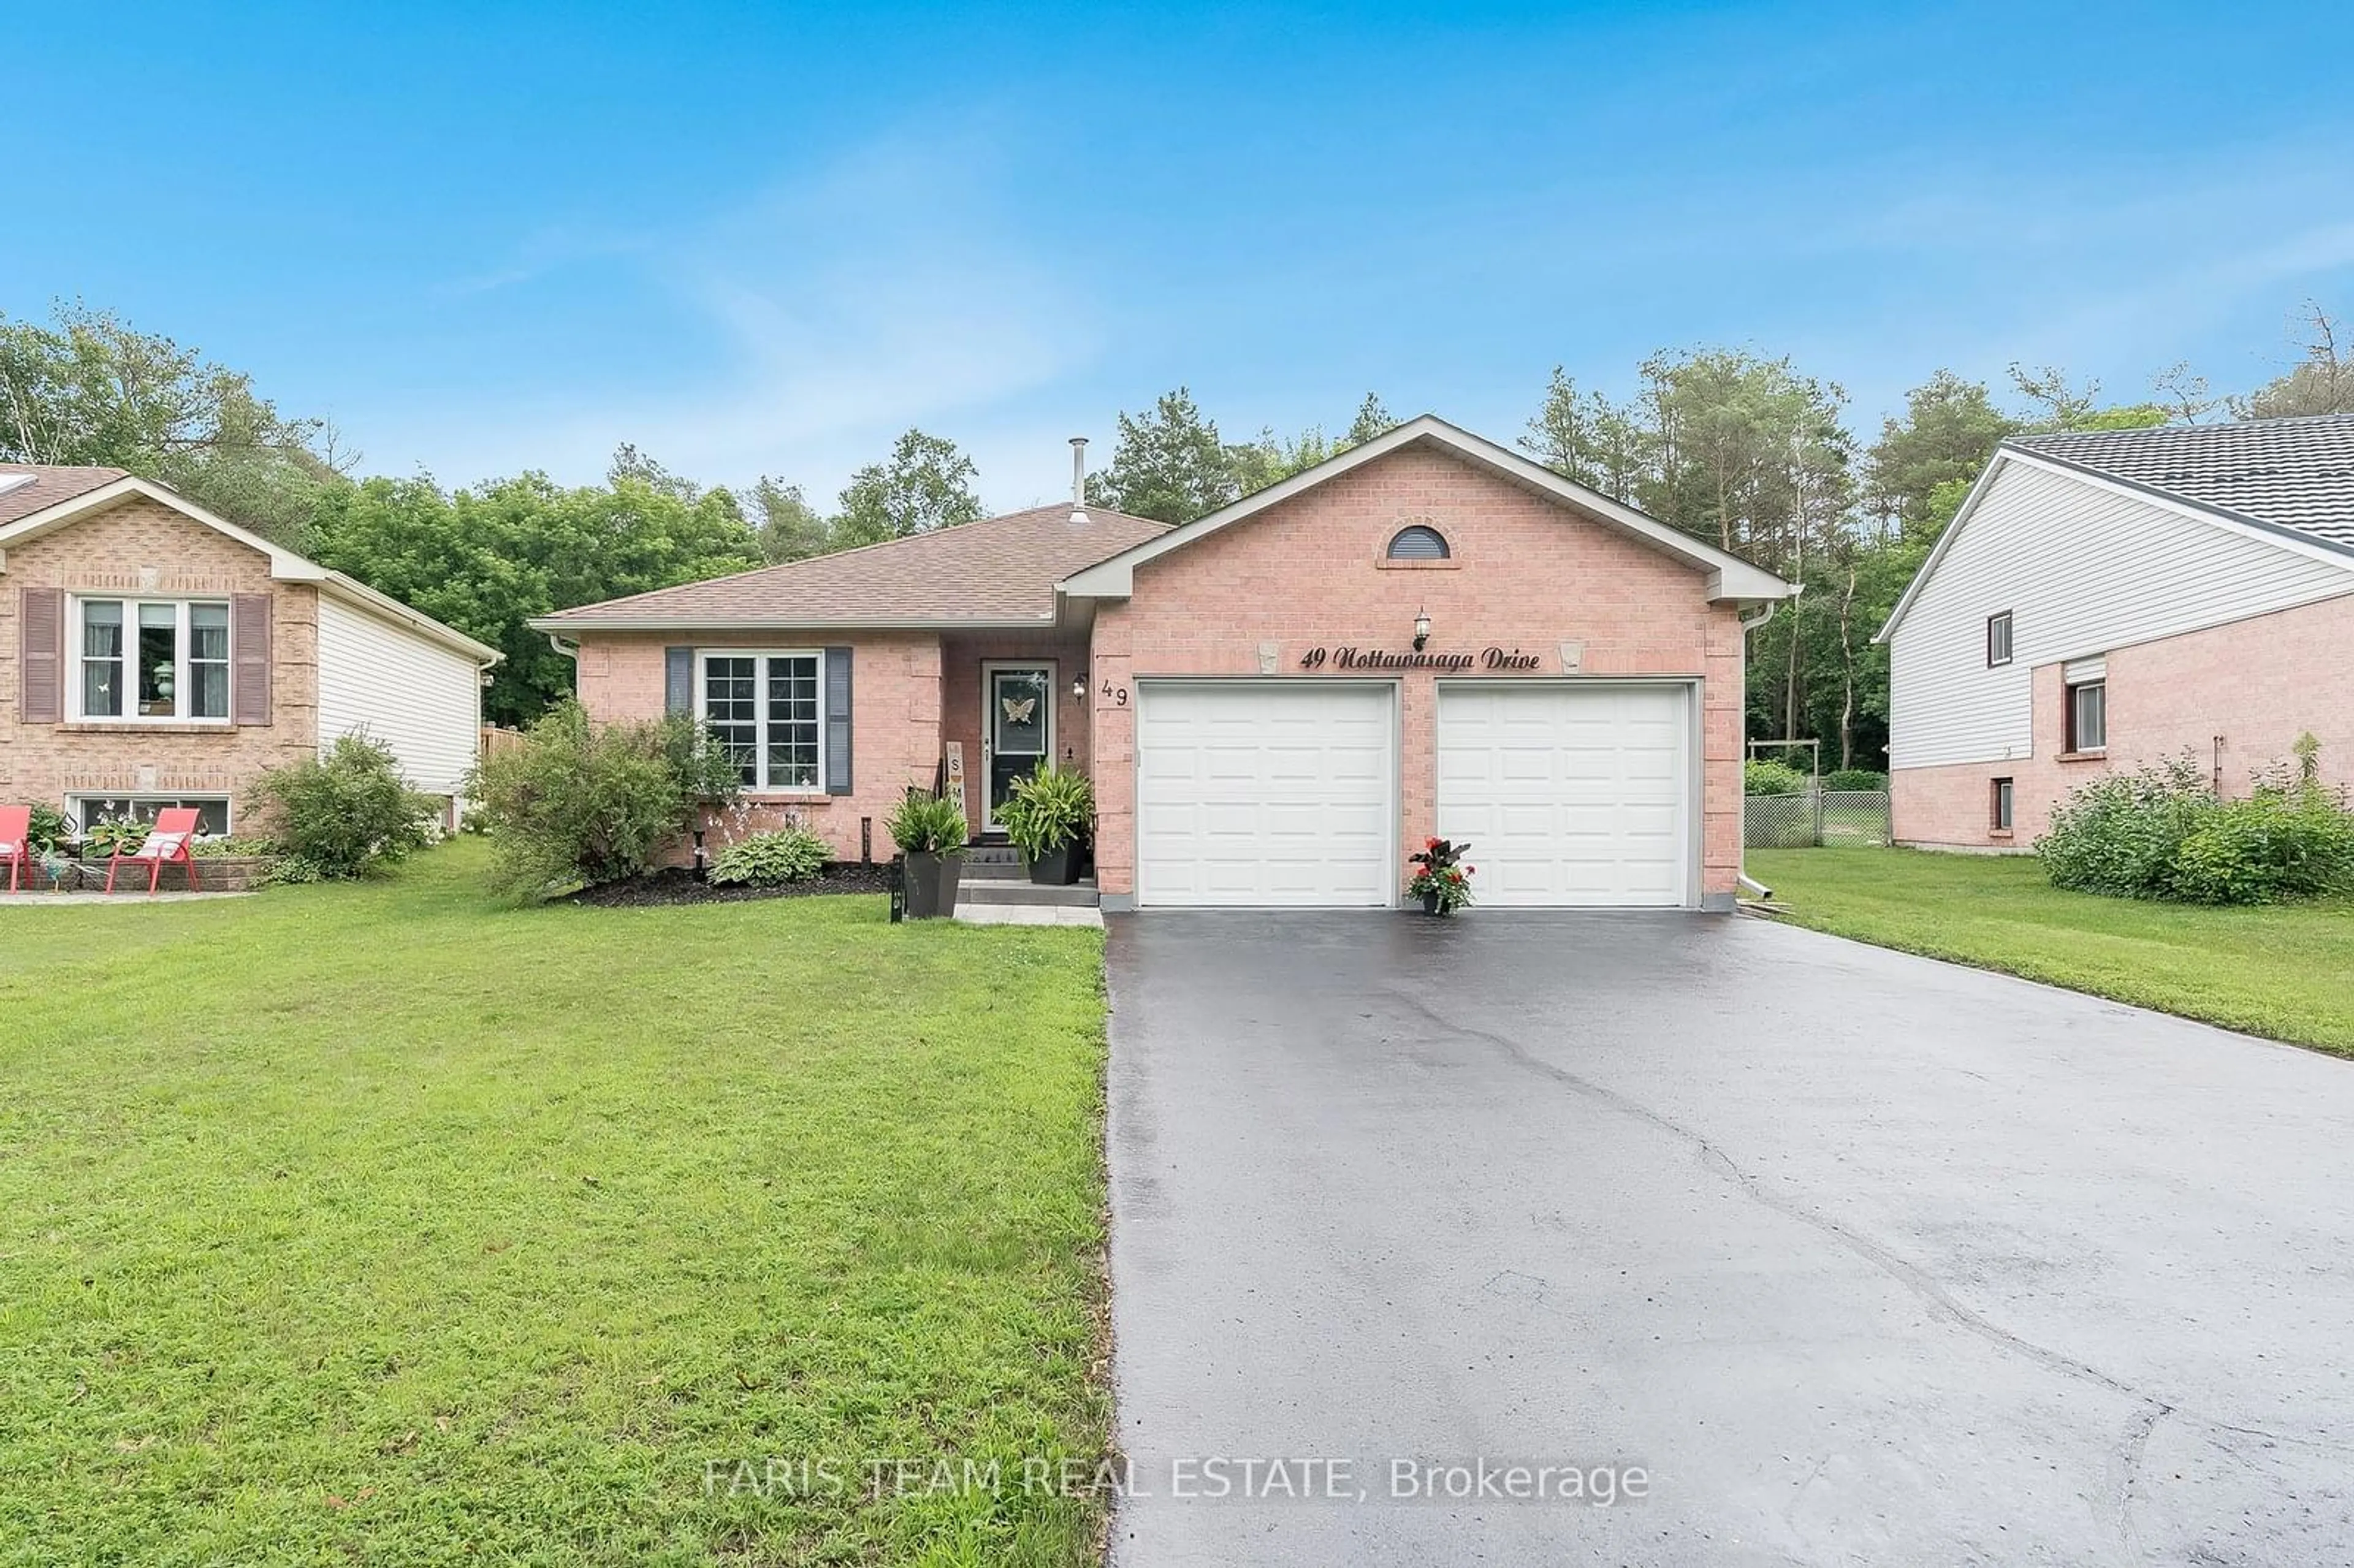 Frontside or backside of a home for 49 Nottawasaga Dr, Essa Ontario L0M 1B0